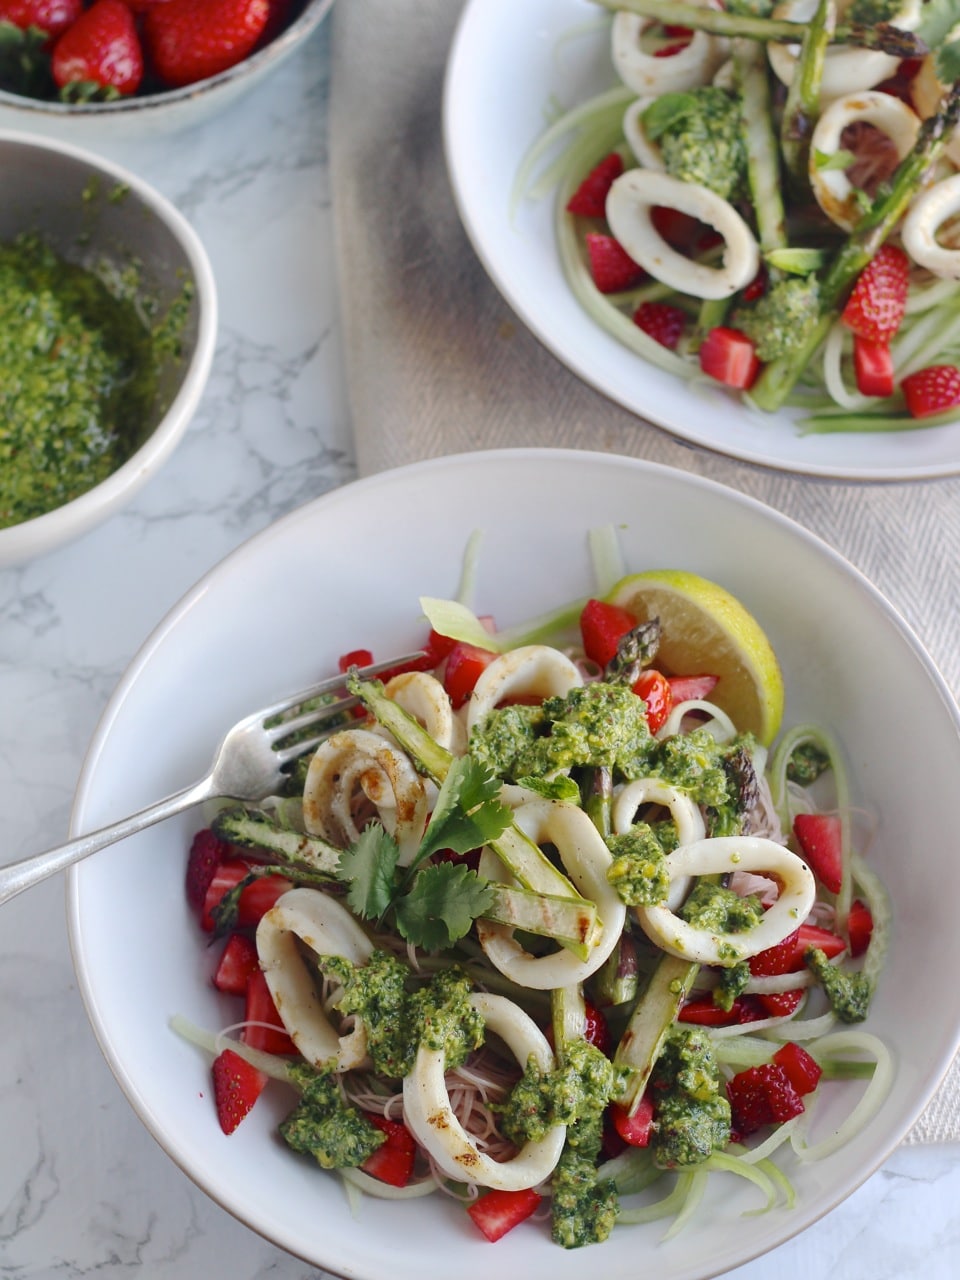 Strawberry Squid Salad with Cucumber, brown rice noodles, asparagus and chilli lime pesto